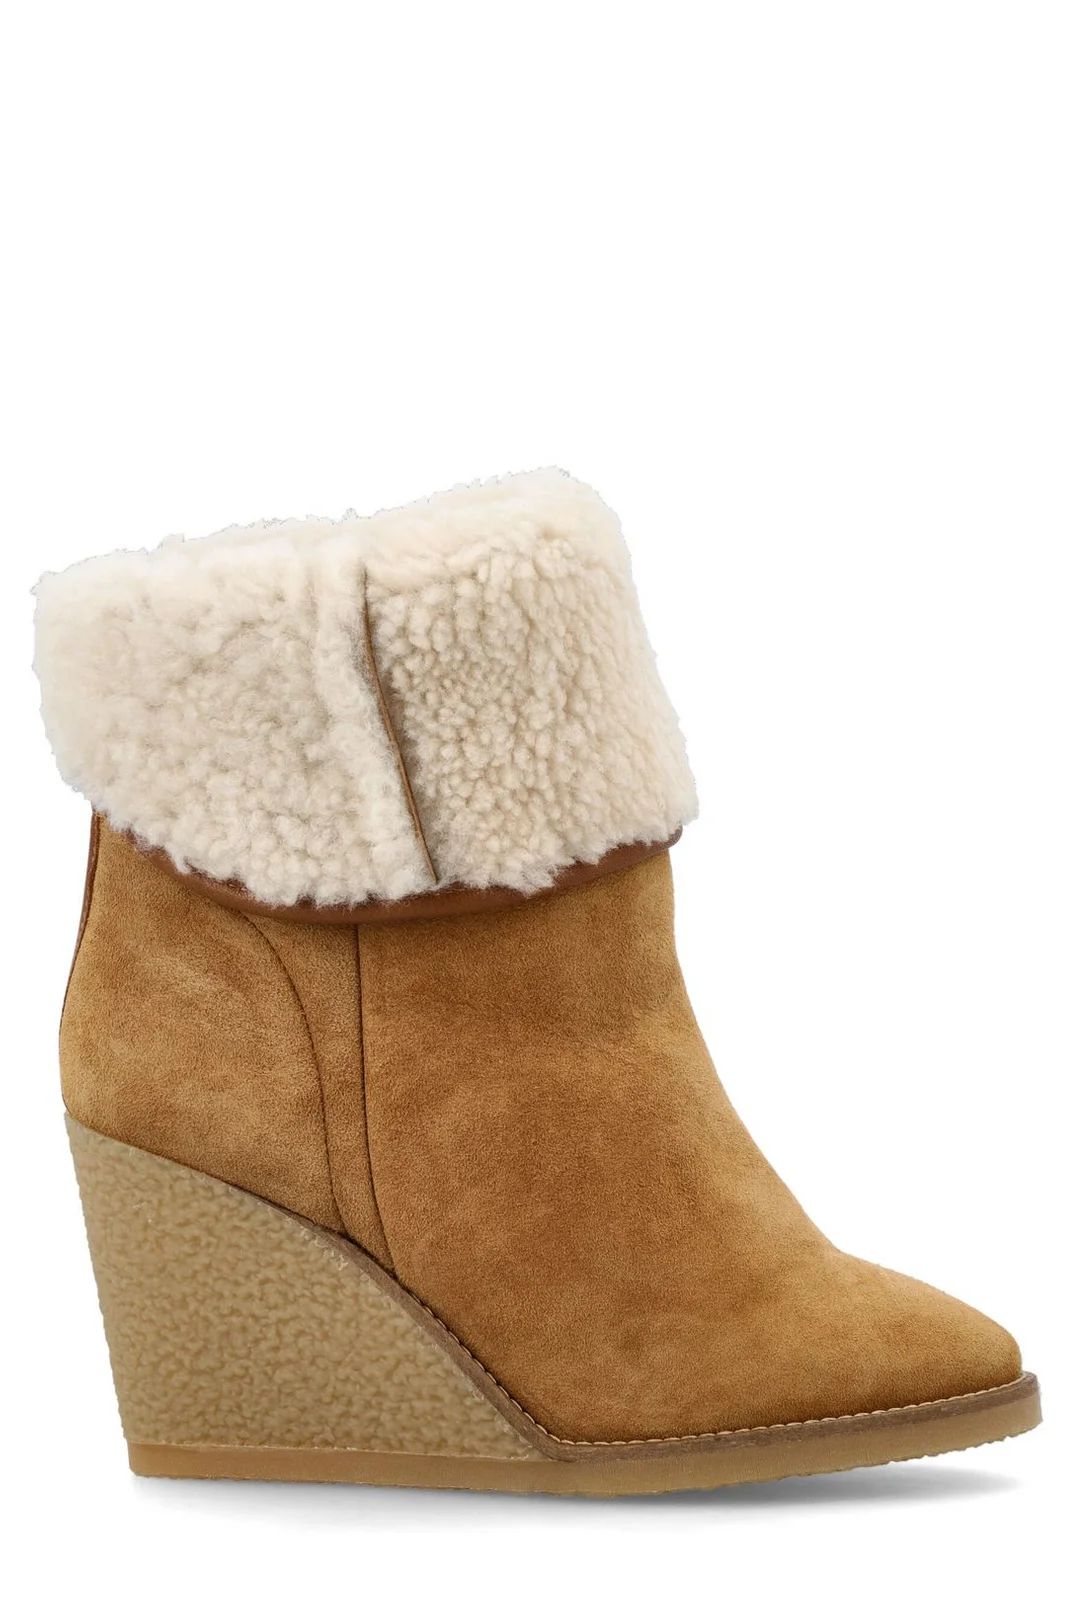 Isabel Marant Totam Wedge Boots | Cettire Global